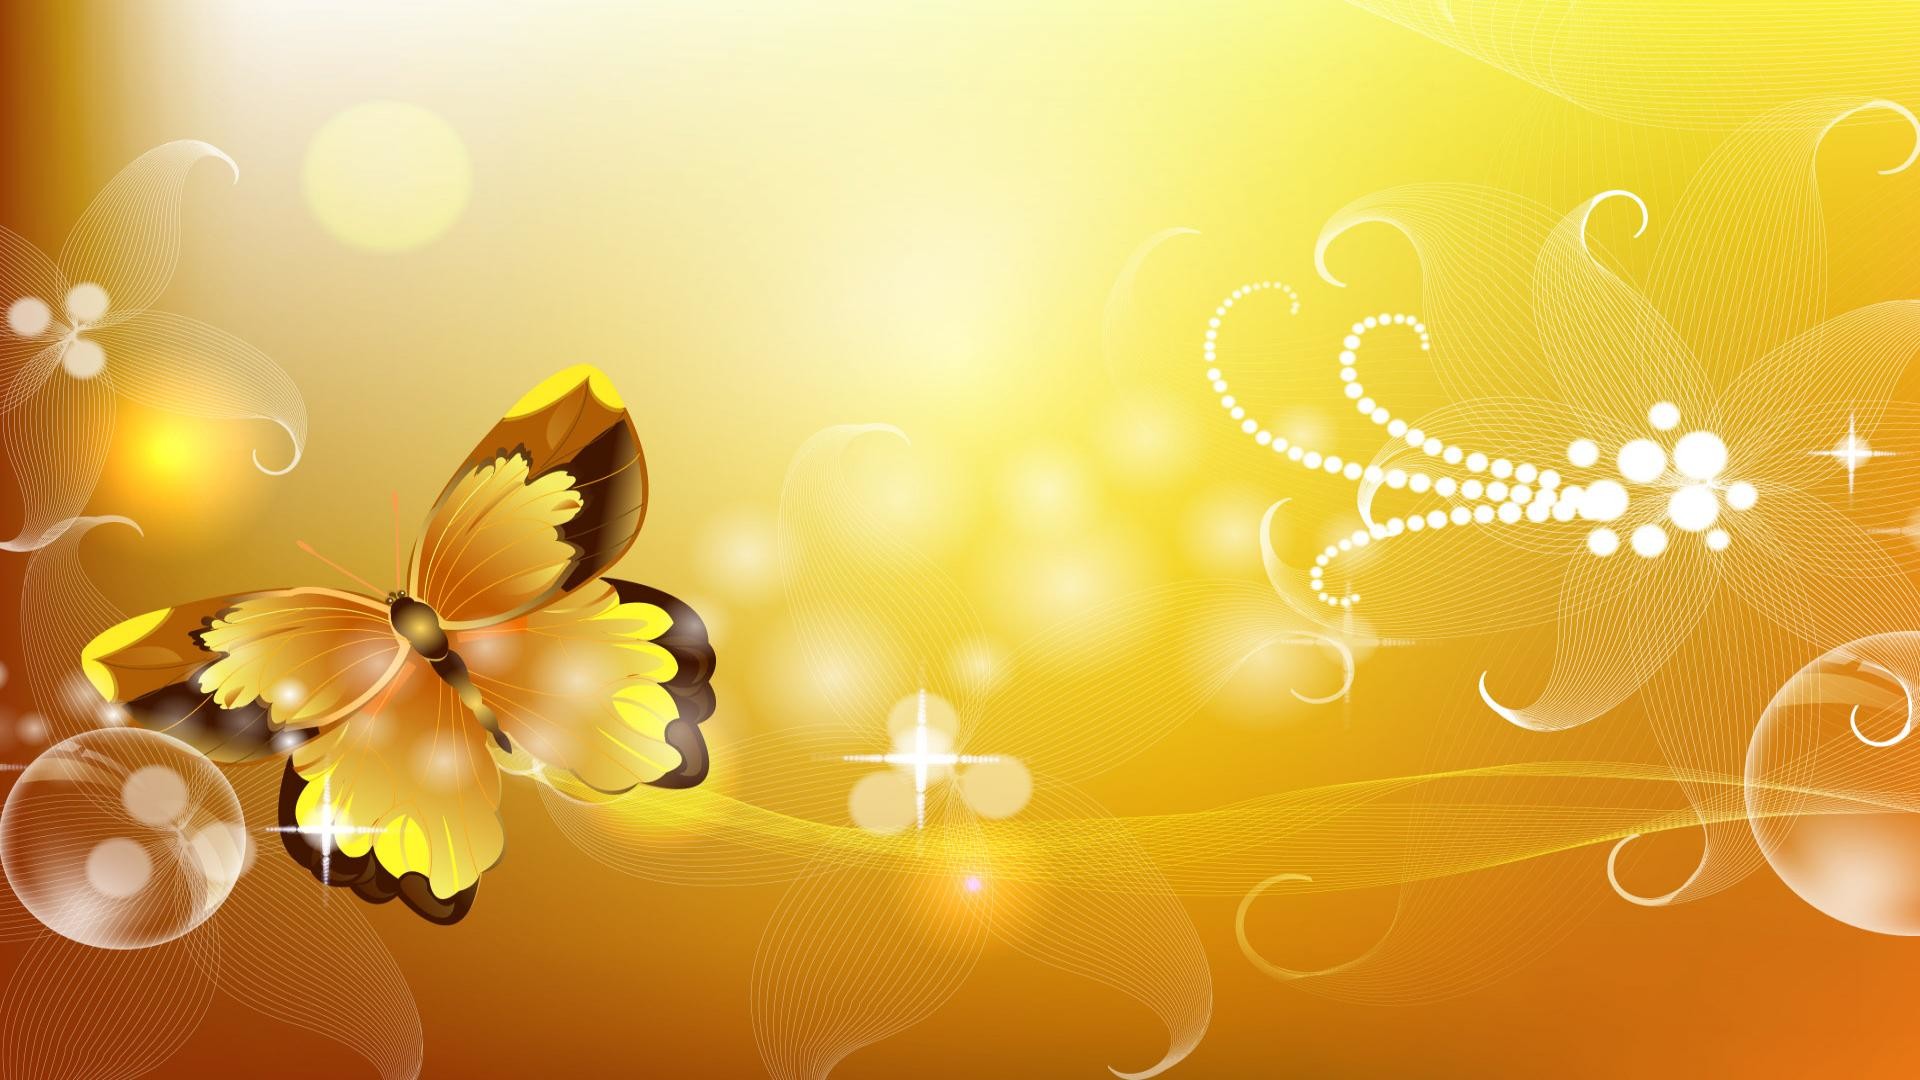 1920x1080 Yellow Buatterfly In Yellow Backgrounds Hd Wallpaper